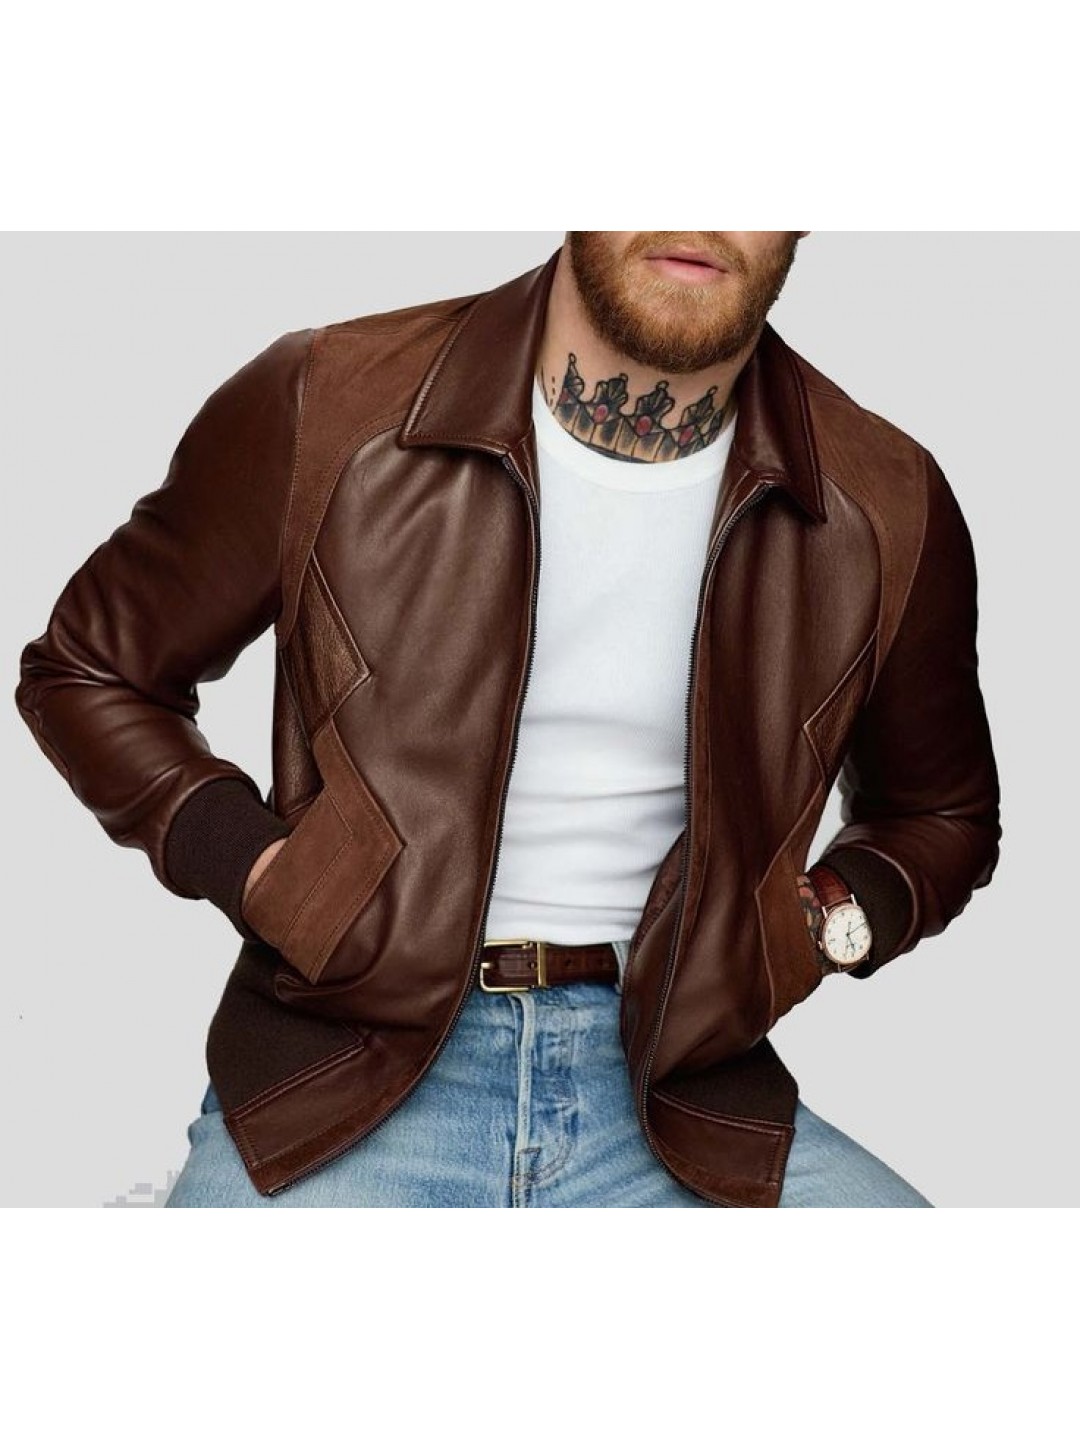 Mens leather bomber jackets – Find the Best Fit